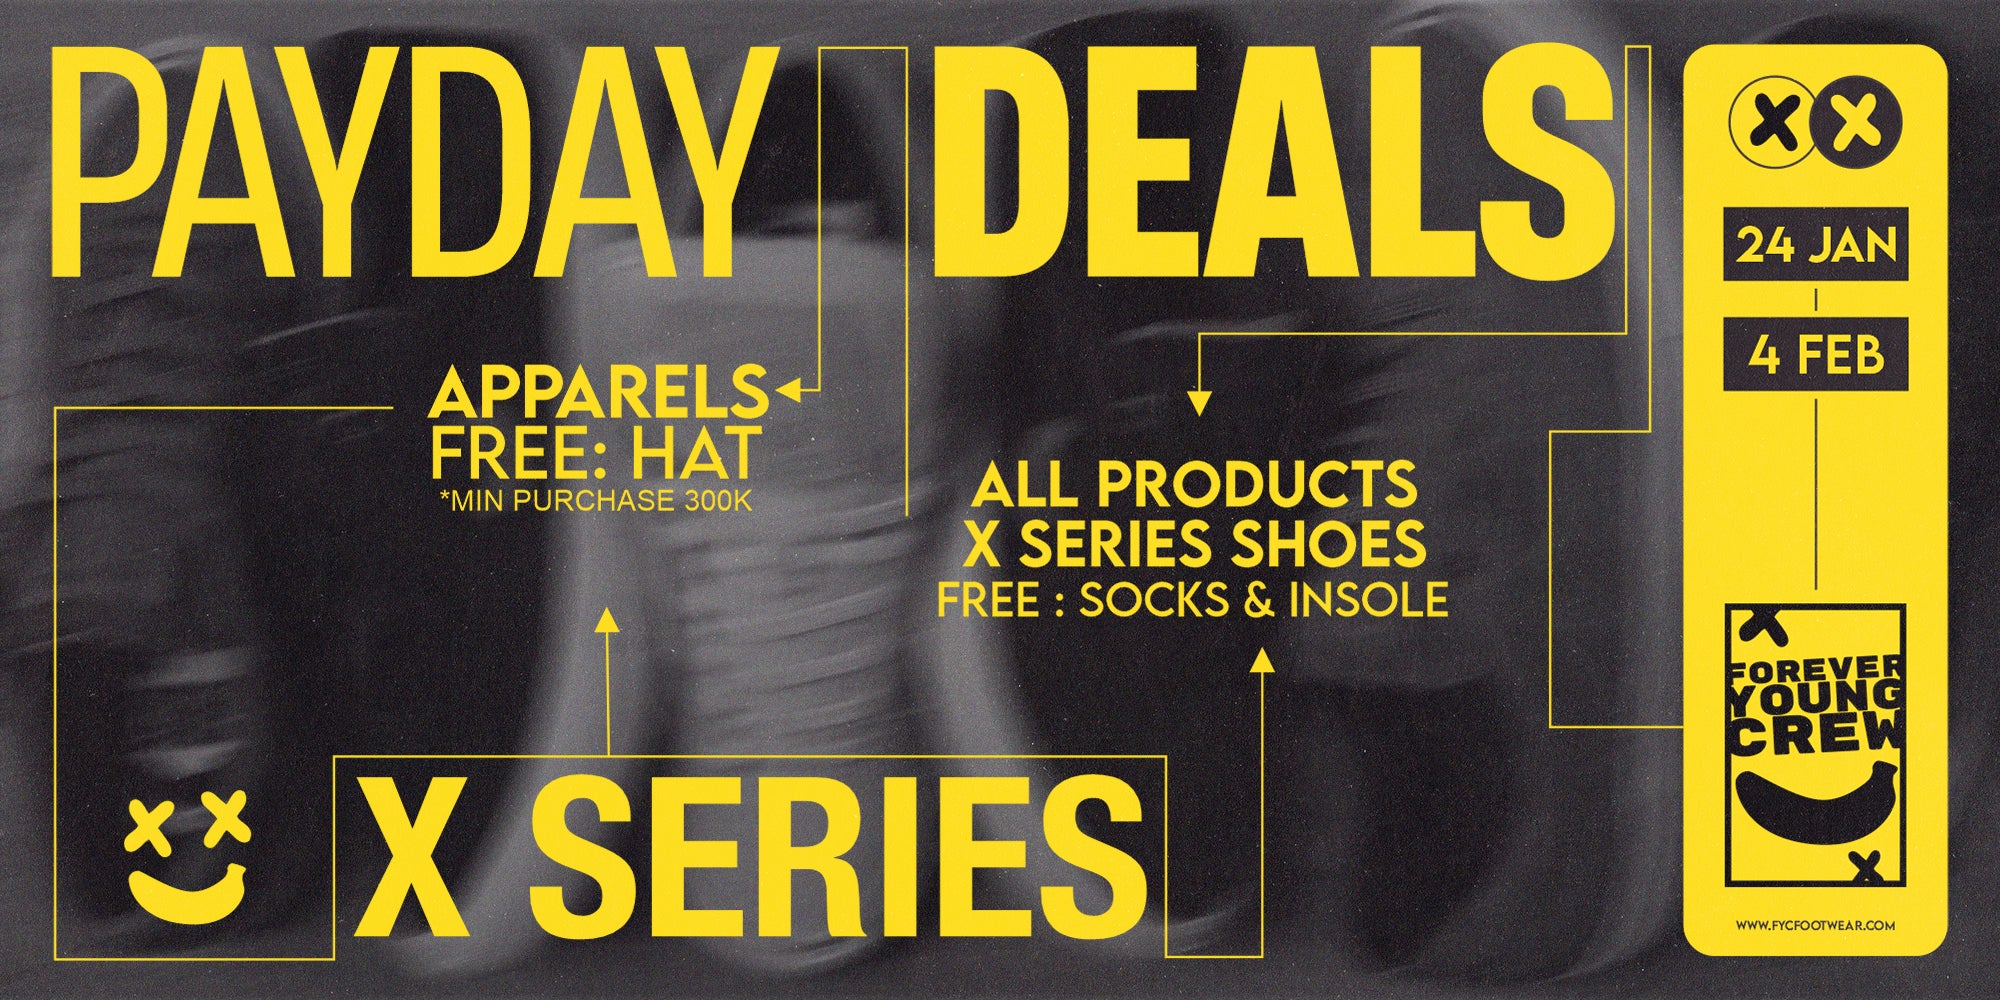 PAYDAY DEALS: ALL SHOES